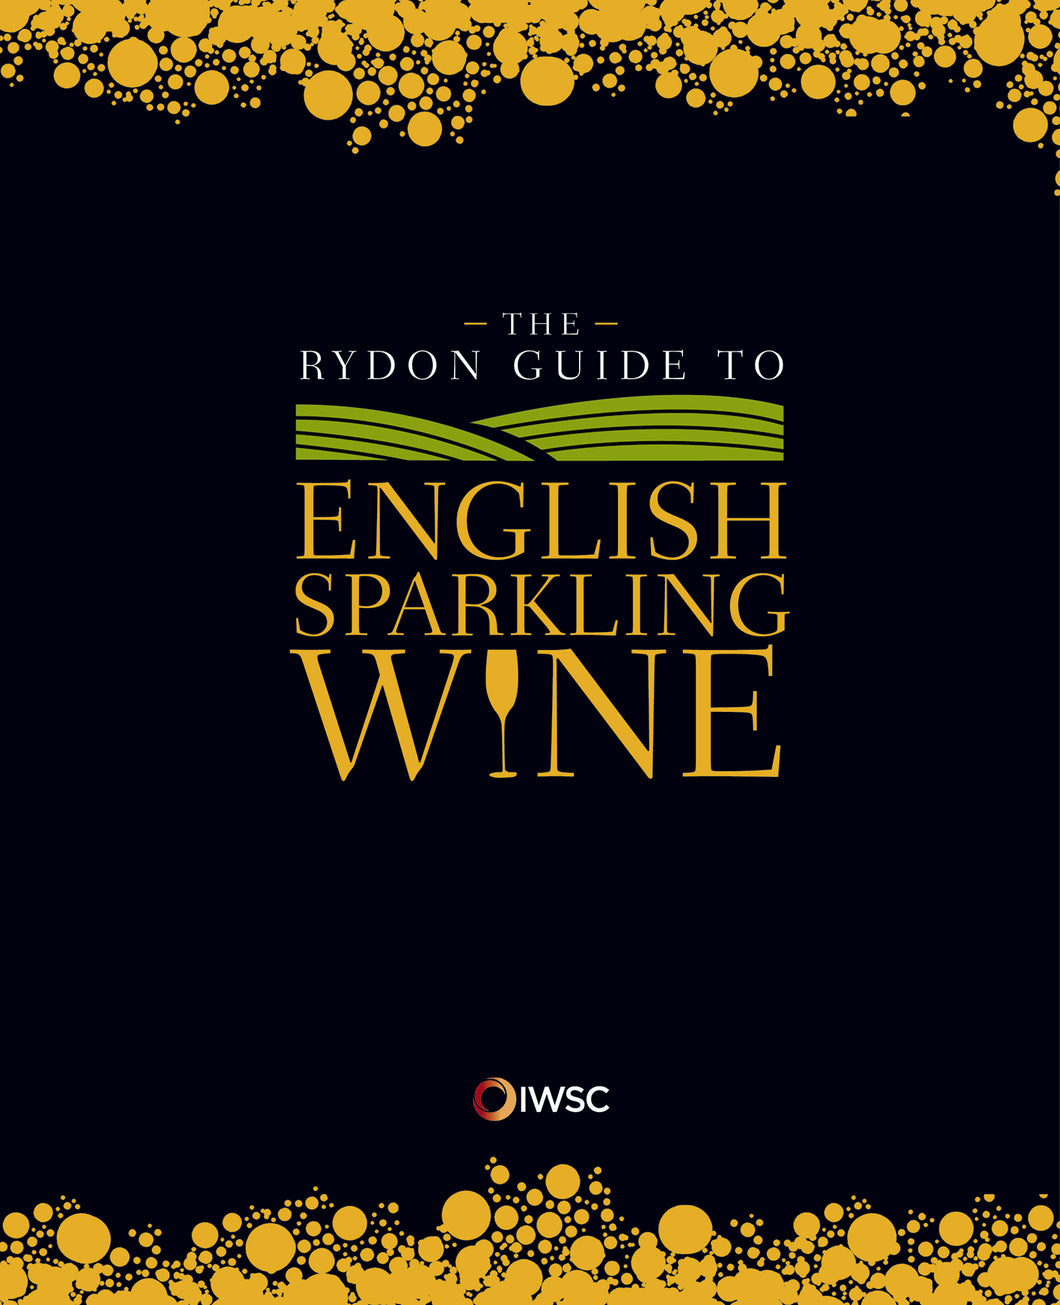 The Rydon Guide to English Sparkling Wine